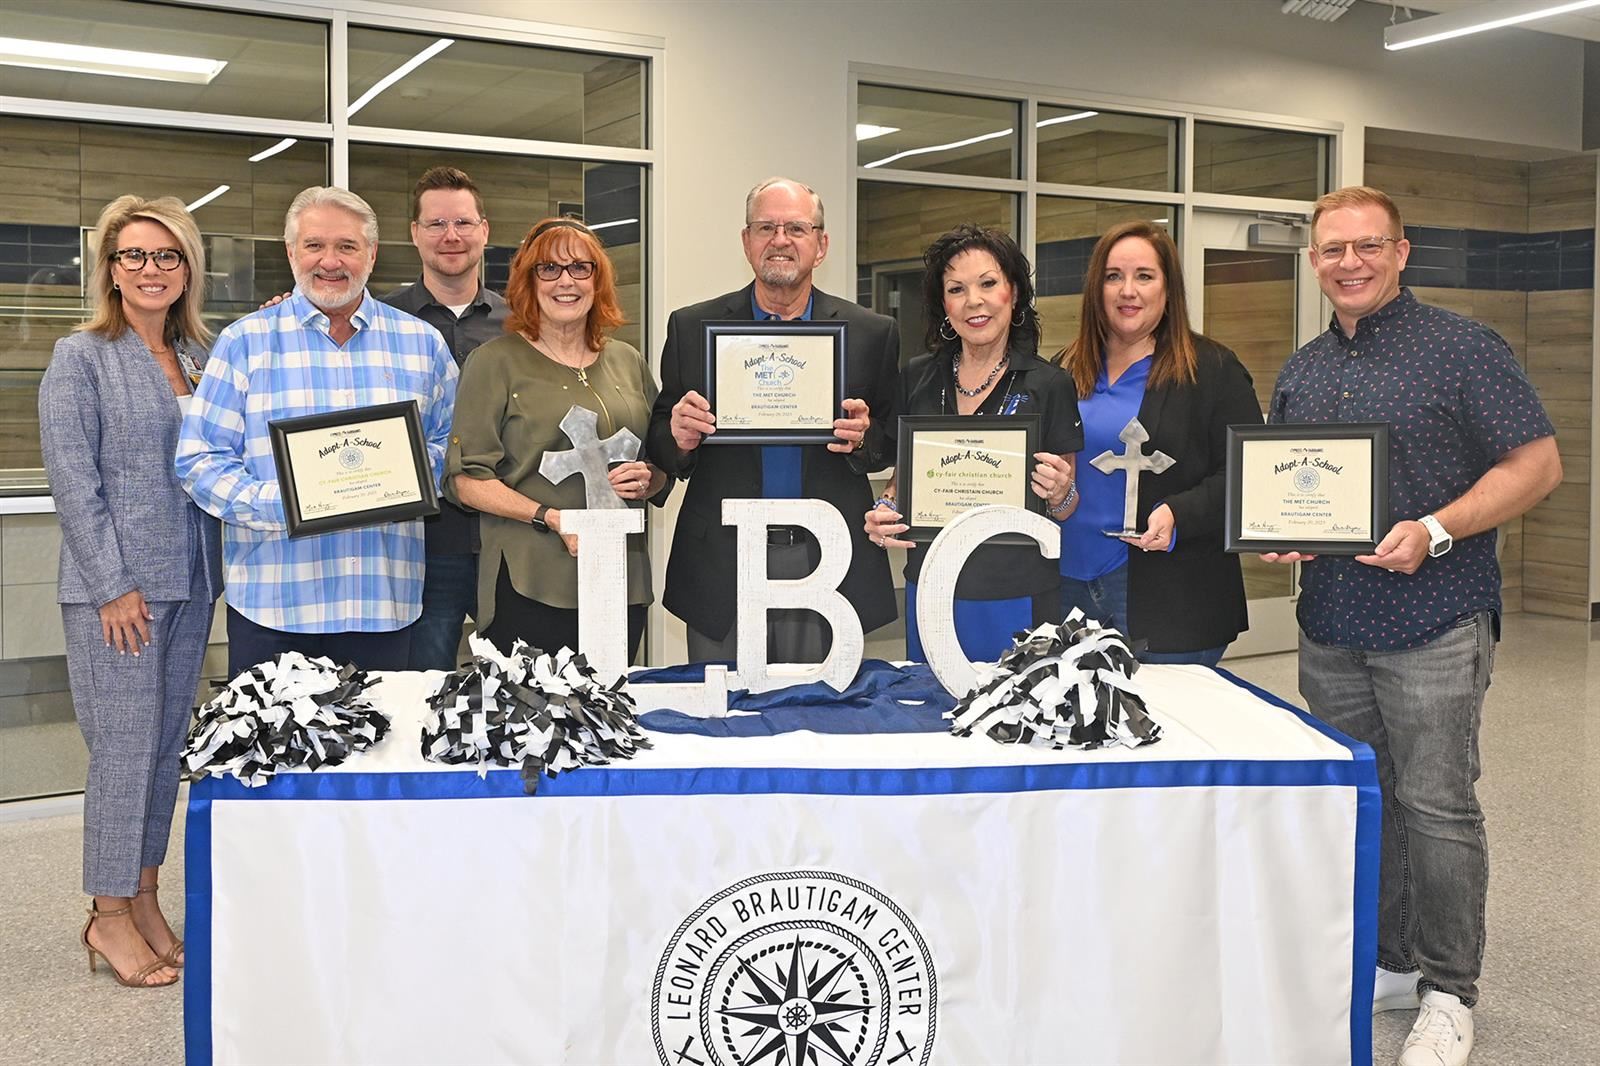 Brautigam Center Principal Martha Strother, third from right, and campus namesake Leonard Brautigam hold certificates.